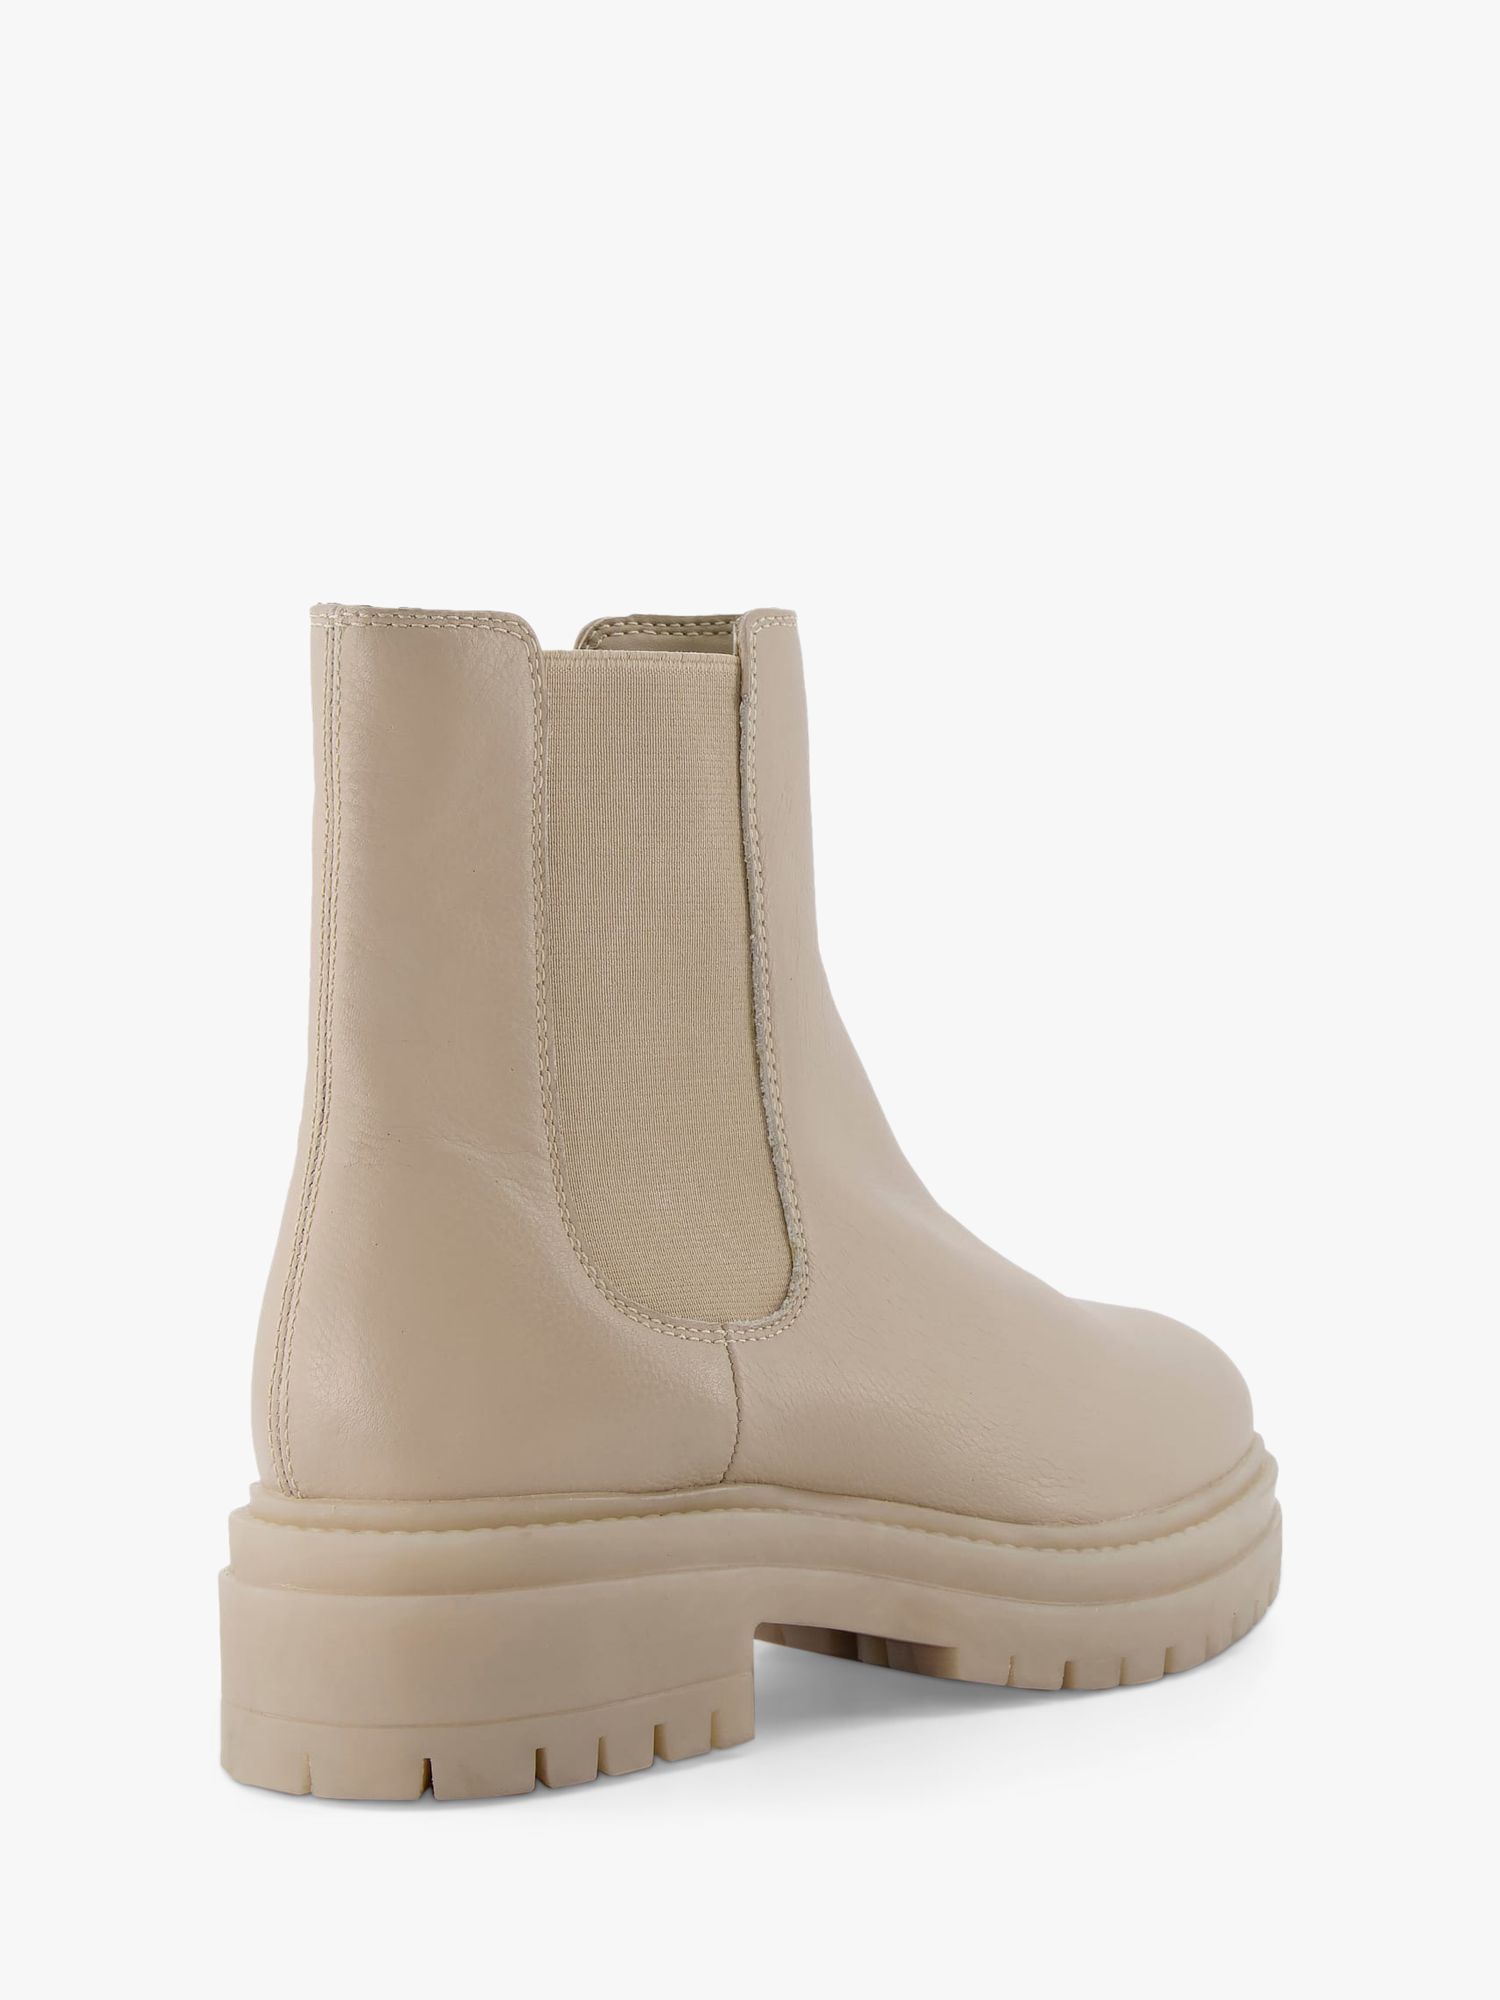 Dune Palles Leather Chunky Ankle Boots, Ecru at John Lewis & Partners